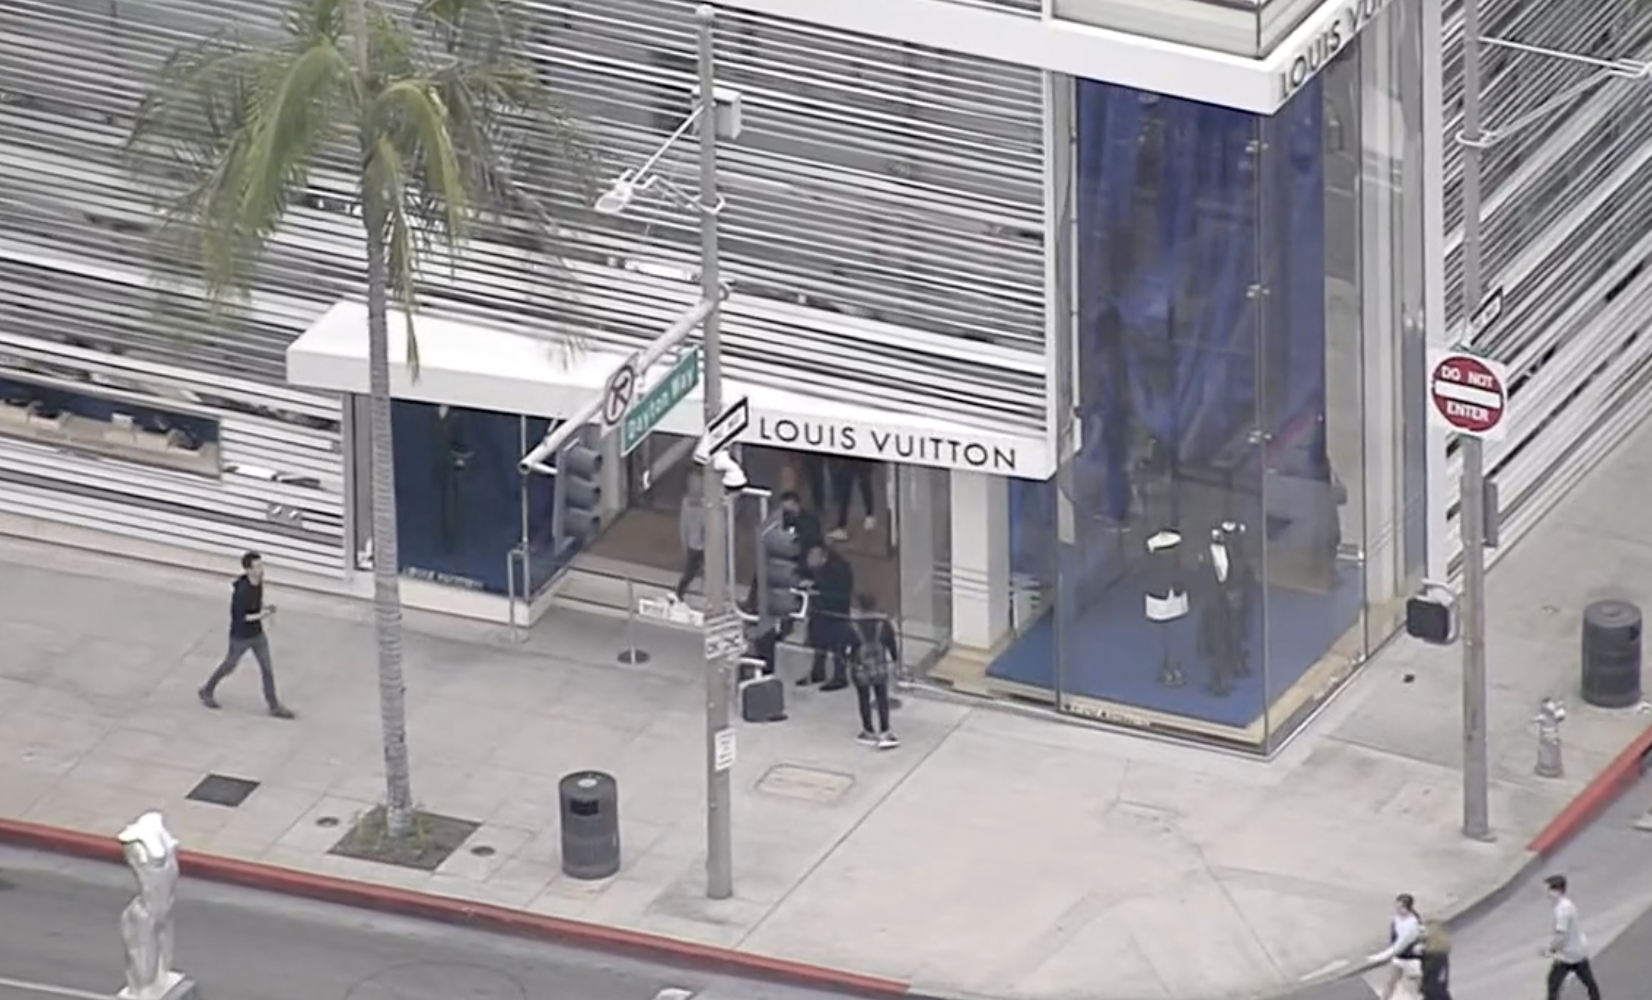 BEVERLY HILLS, LOS ANGELES, CALIFORNIA, USA - MARCH 21: Louis Vuitton  Beverly Hills Rodeo Drive store, temporarily closed due to the coronavirus,  two days after the 'Safer at Home' order issued by